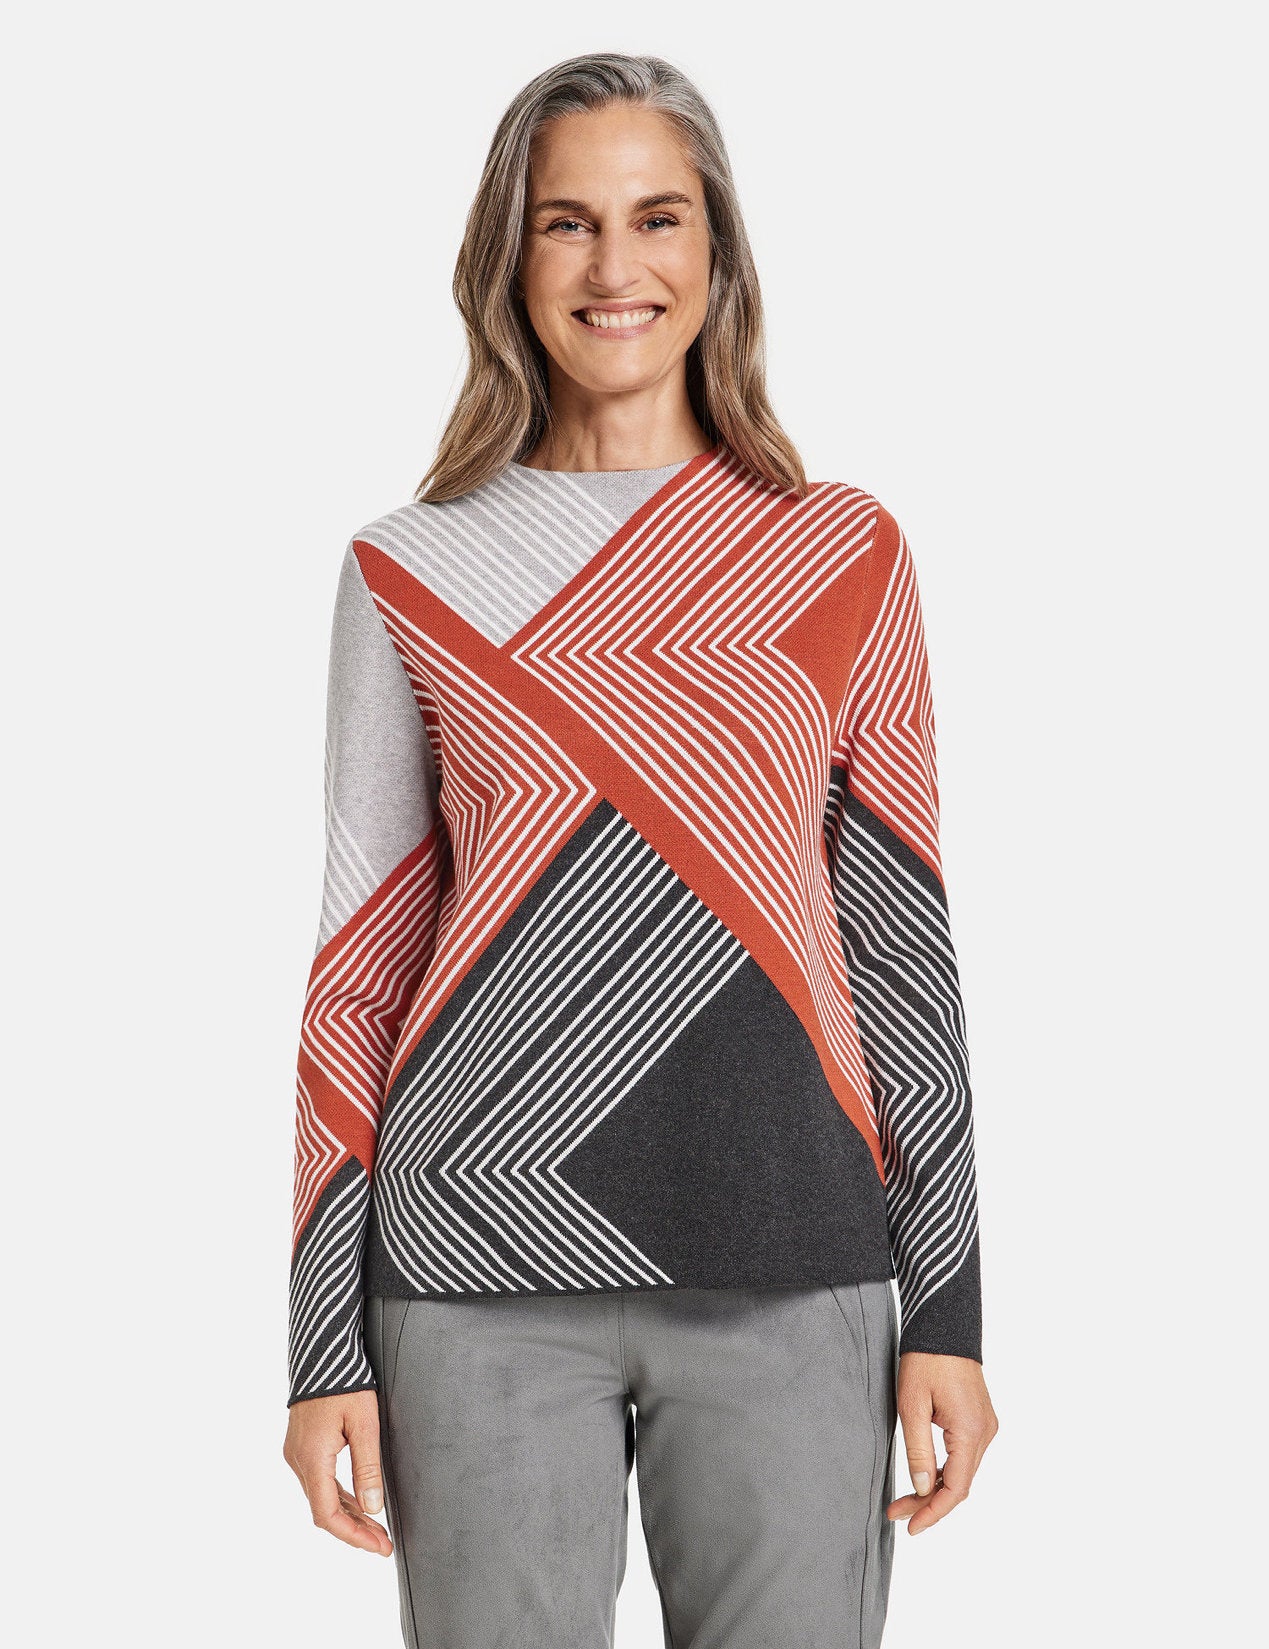 Jumper In A Jacquard Look With A Graphic Pattern_271012-35701_2070_07